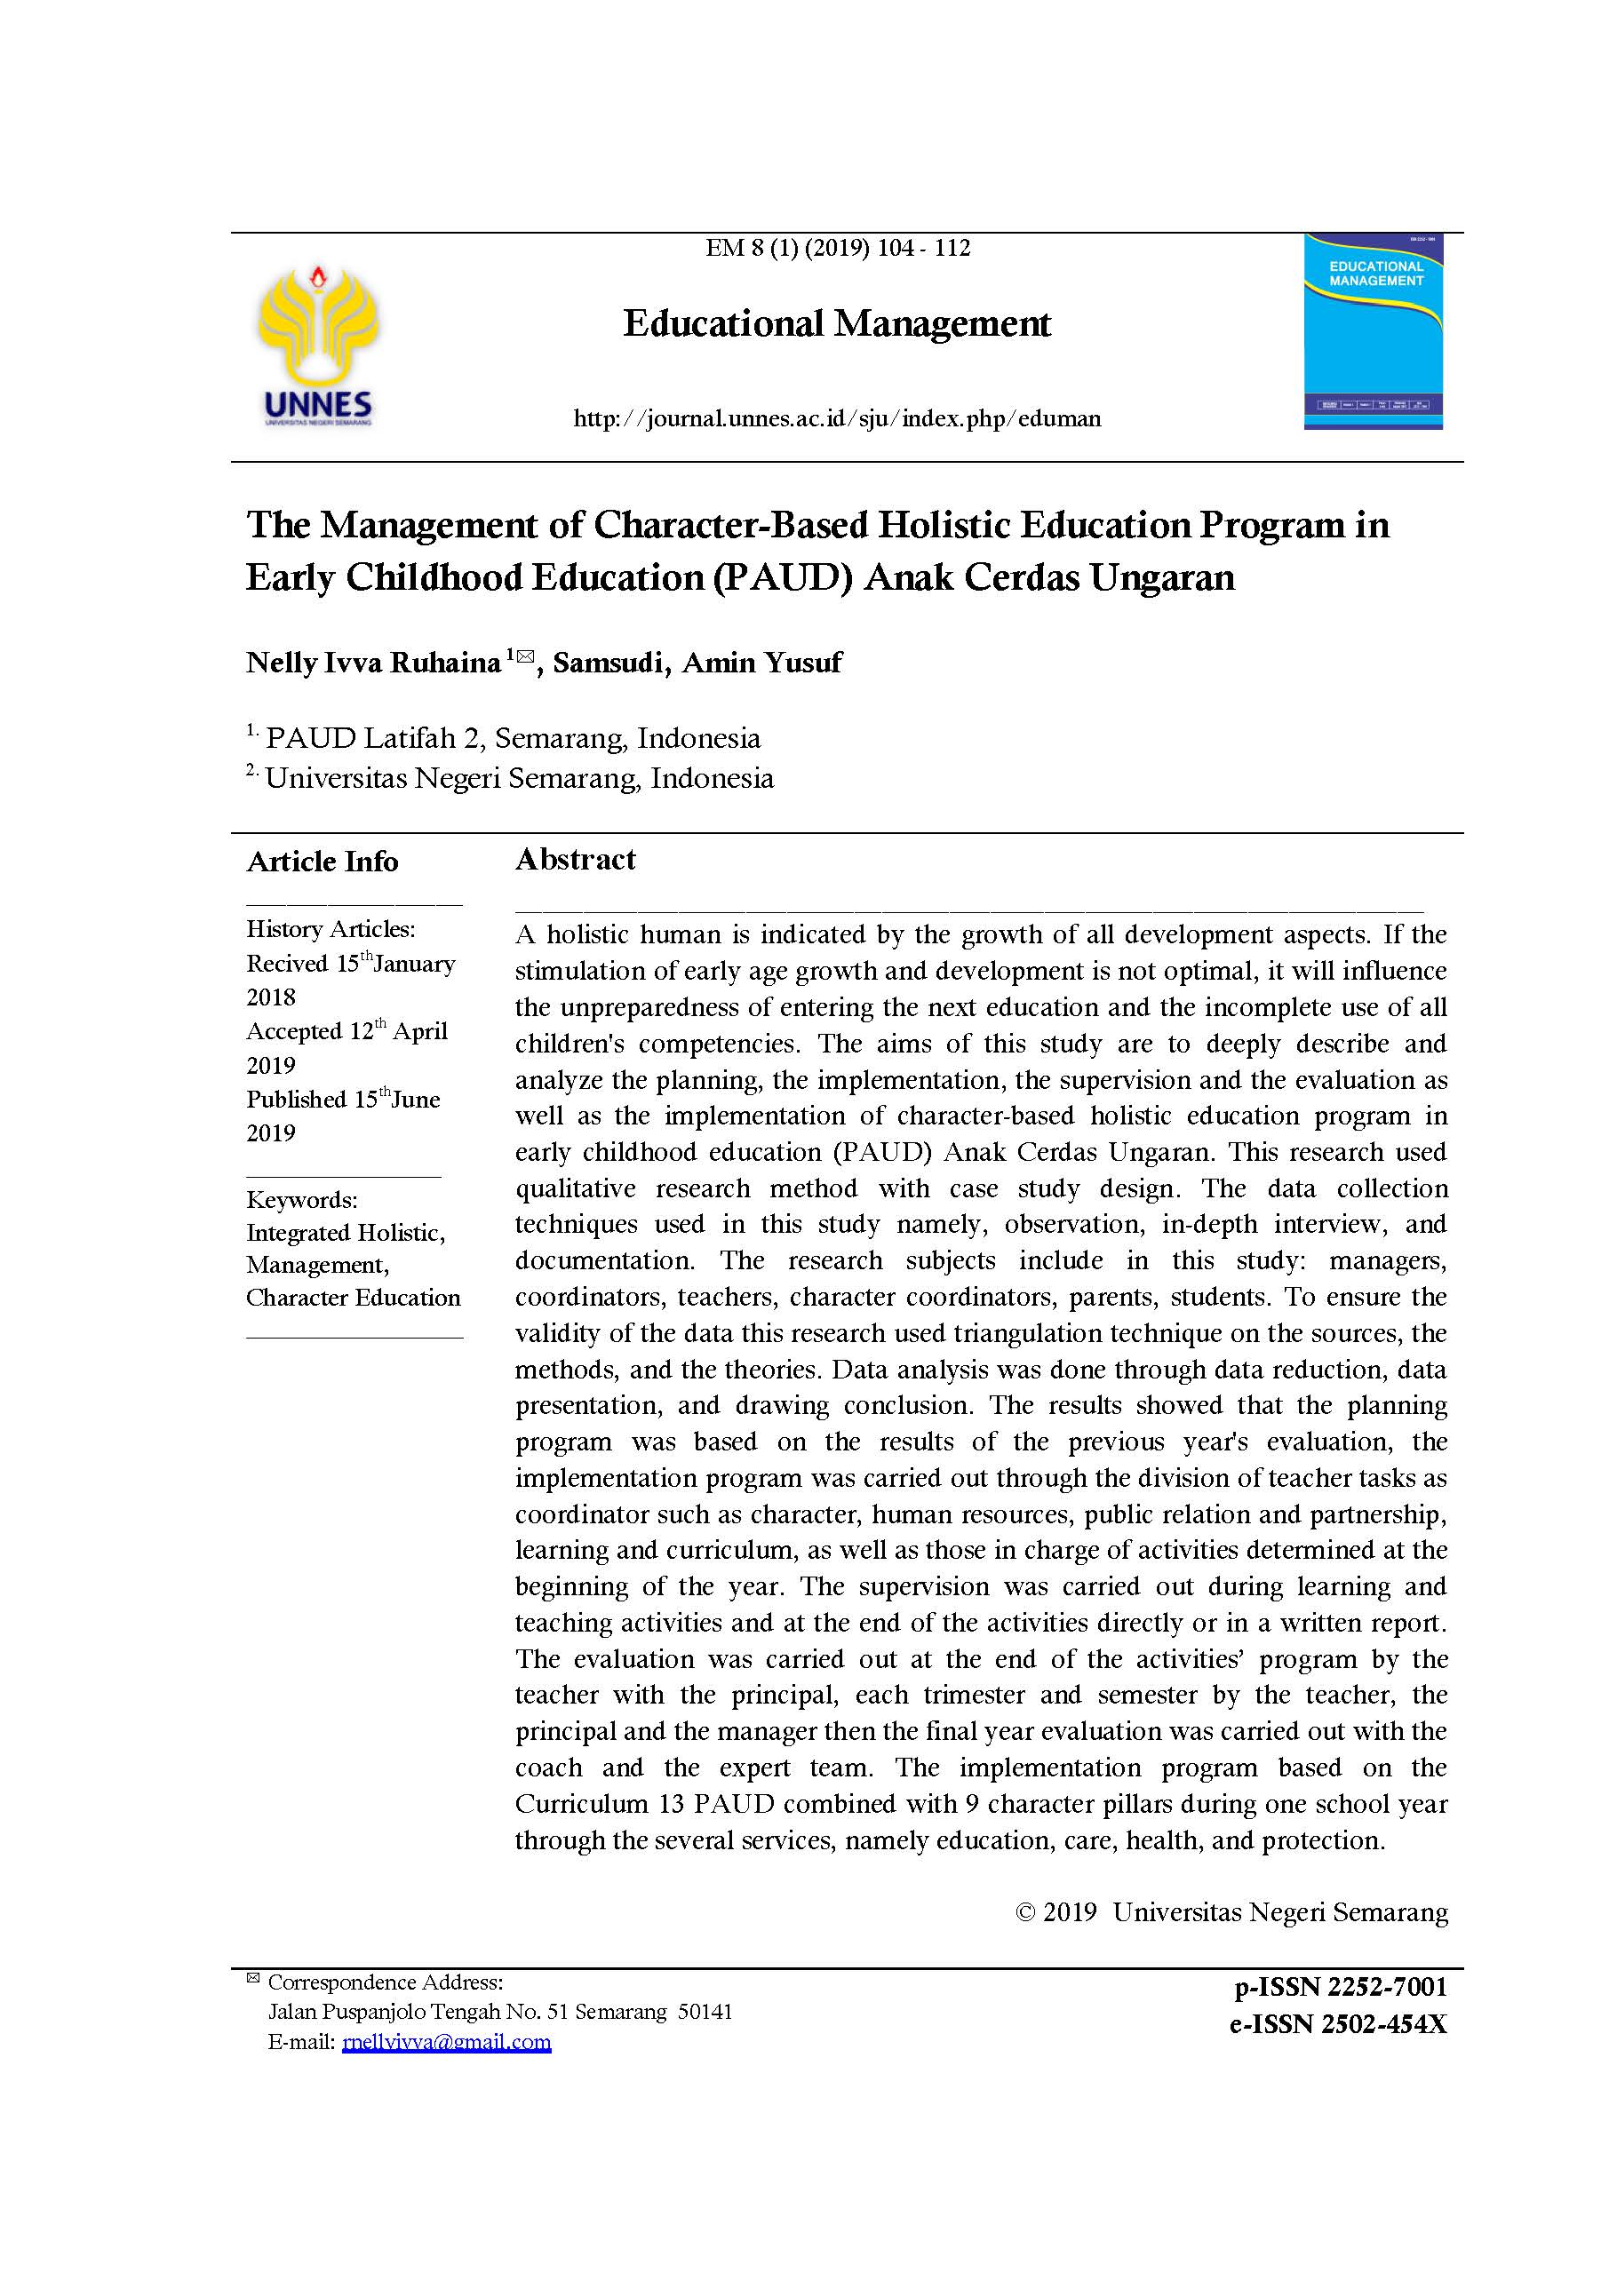 The Management of Character Based Holistic Education Program in Early Childhood Education PAUD Anak Cerdas Ungaran